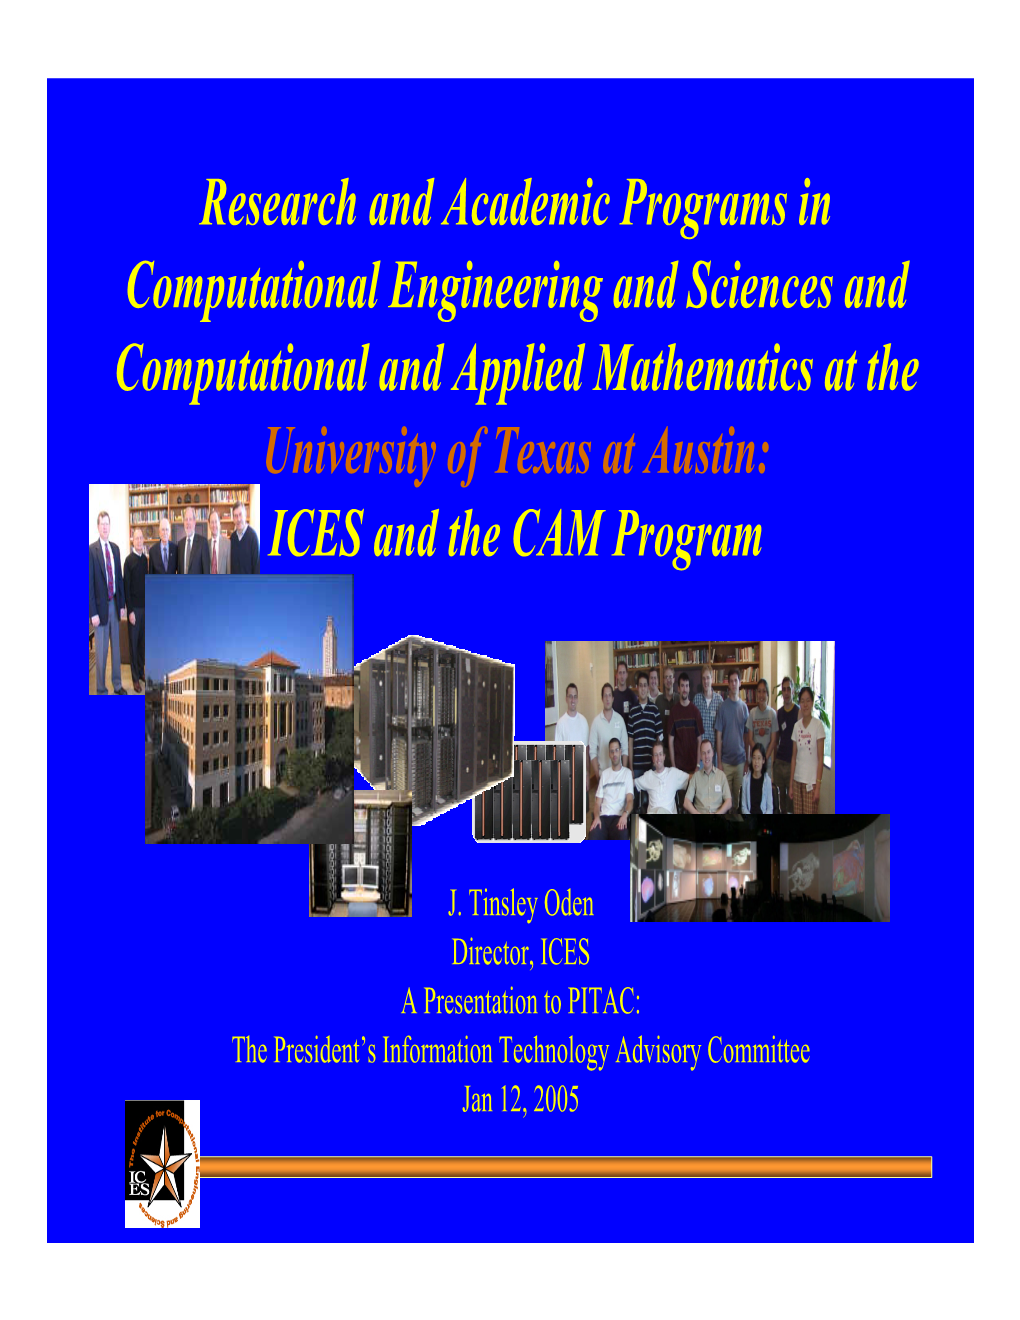 University of Texas at Austin: ICES and the CAM Program